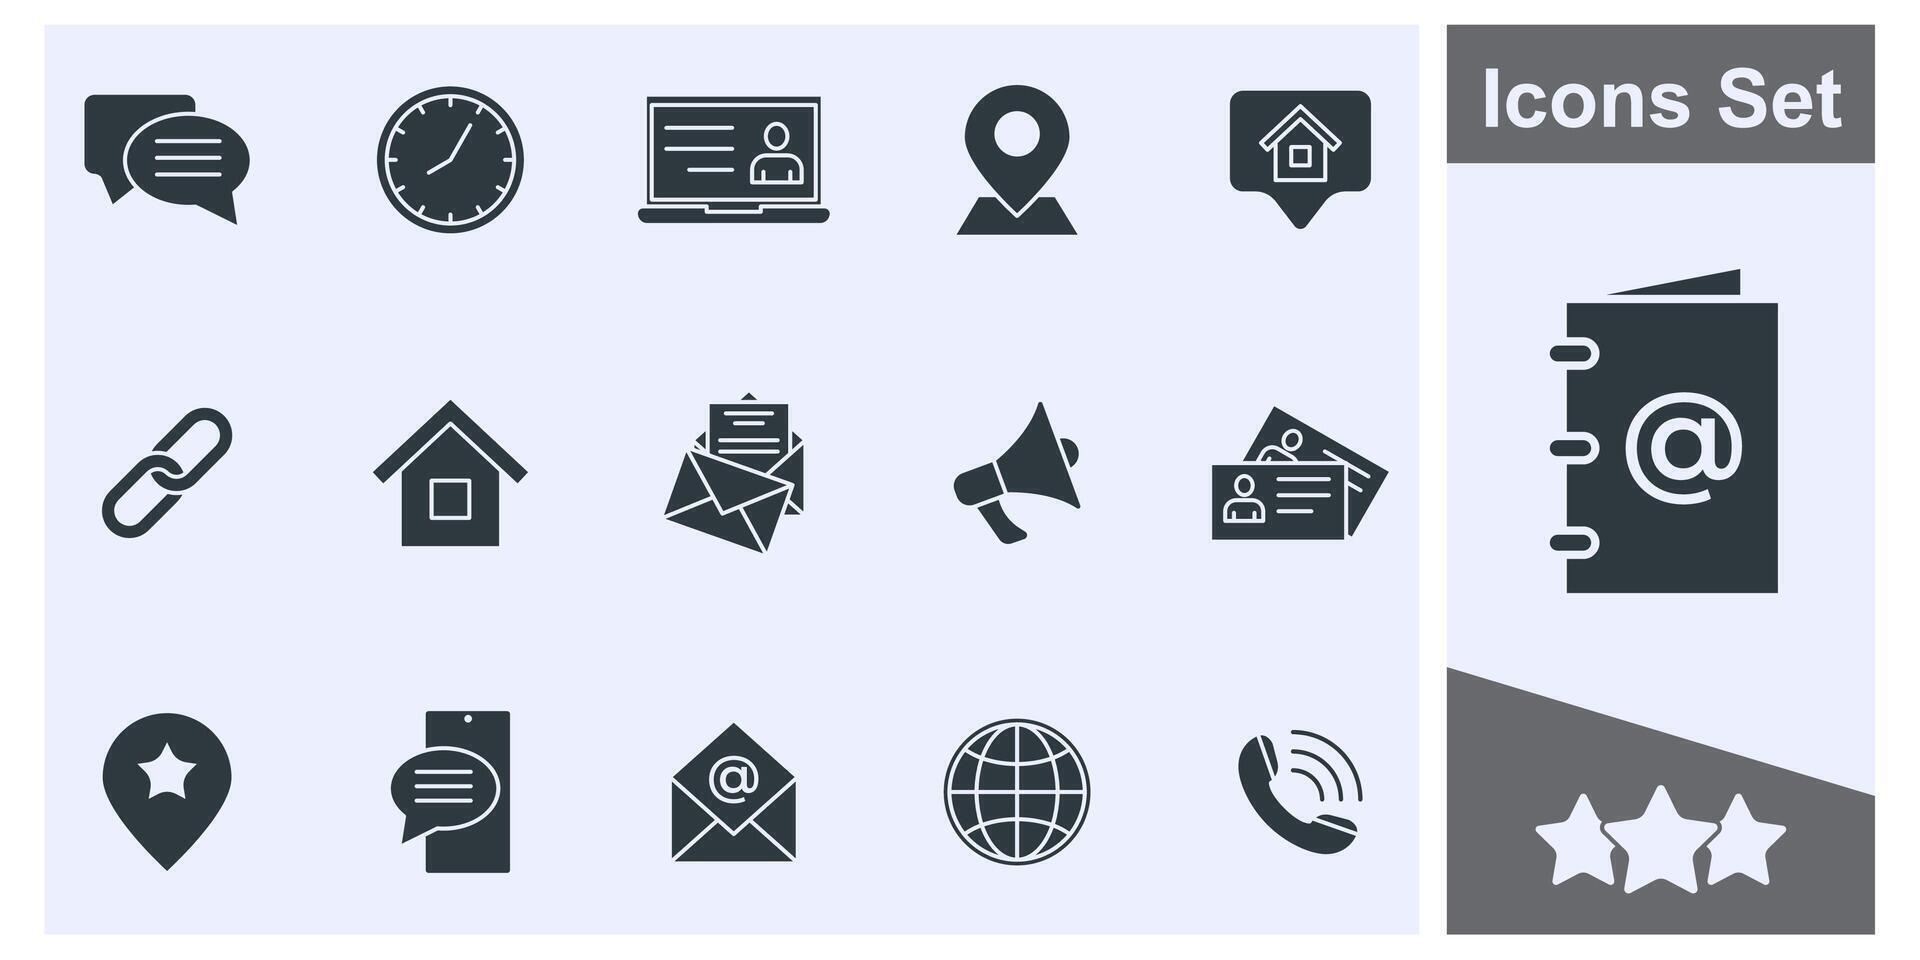 Contact us icon set symbol collection, logo isolated illustration vector